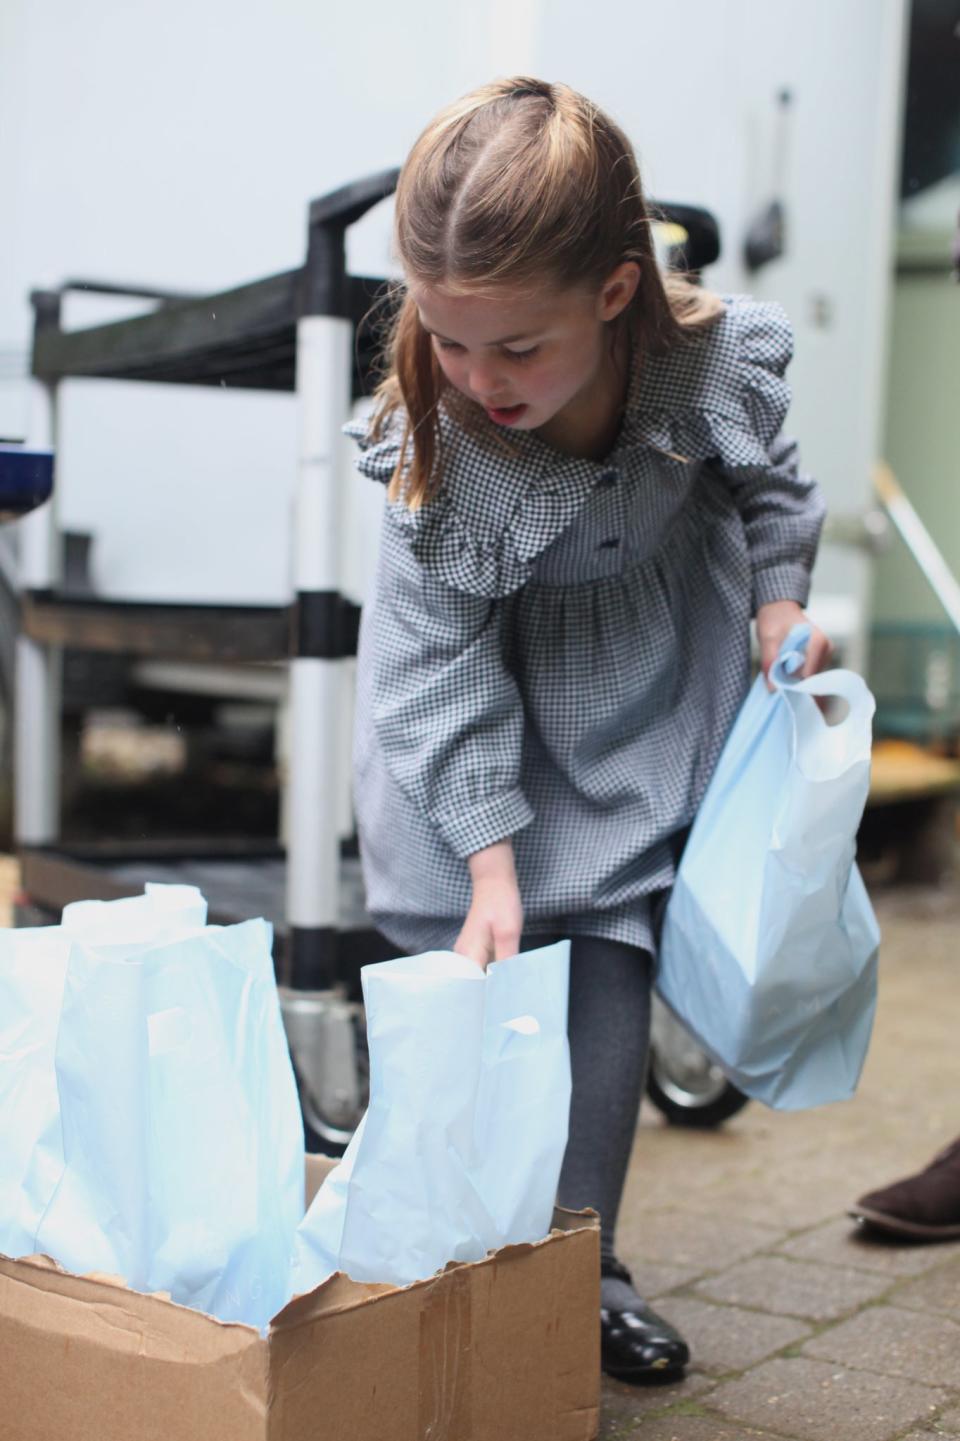 Taken during the COVID-19 pandemic, Charlotte's fifth birthday portraits show her delivering food to neighbors in need.